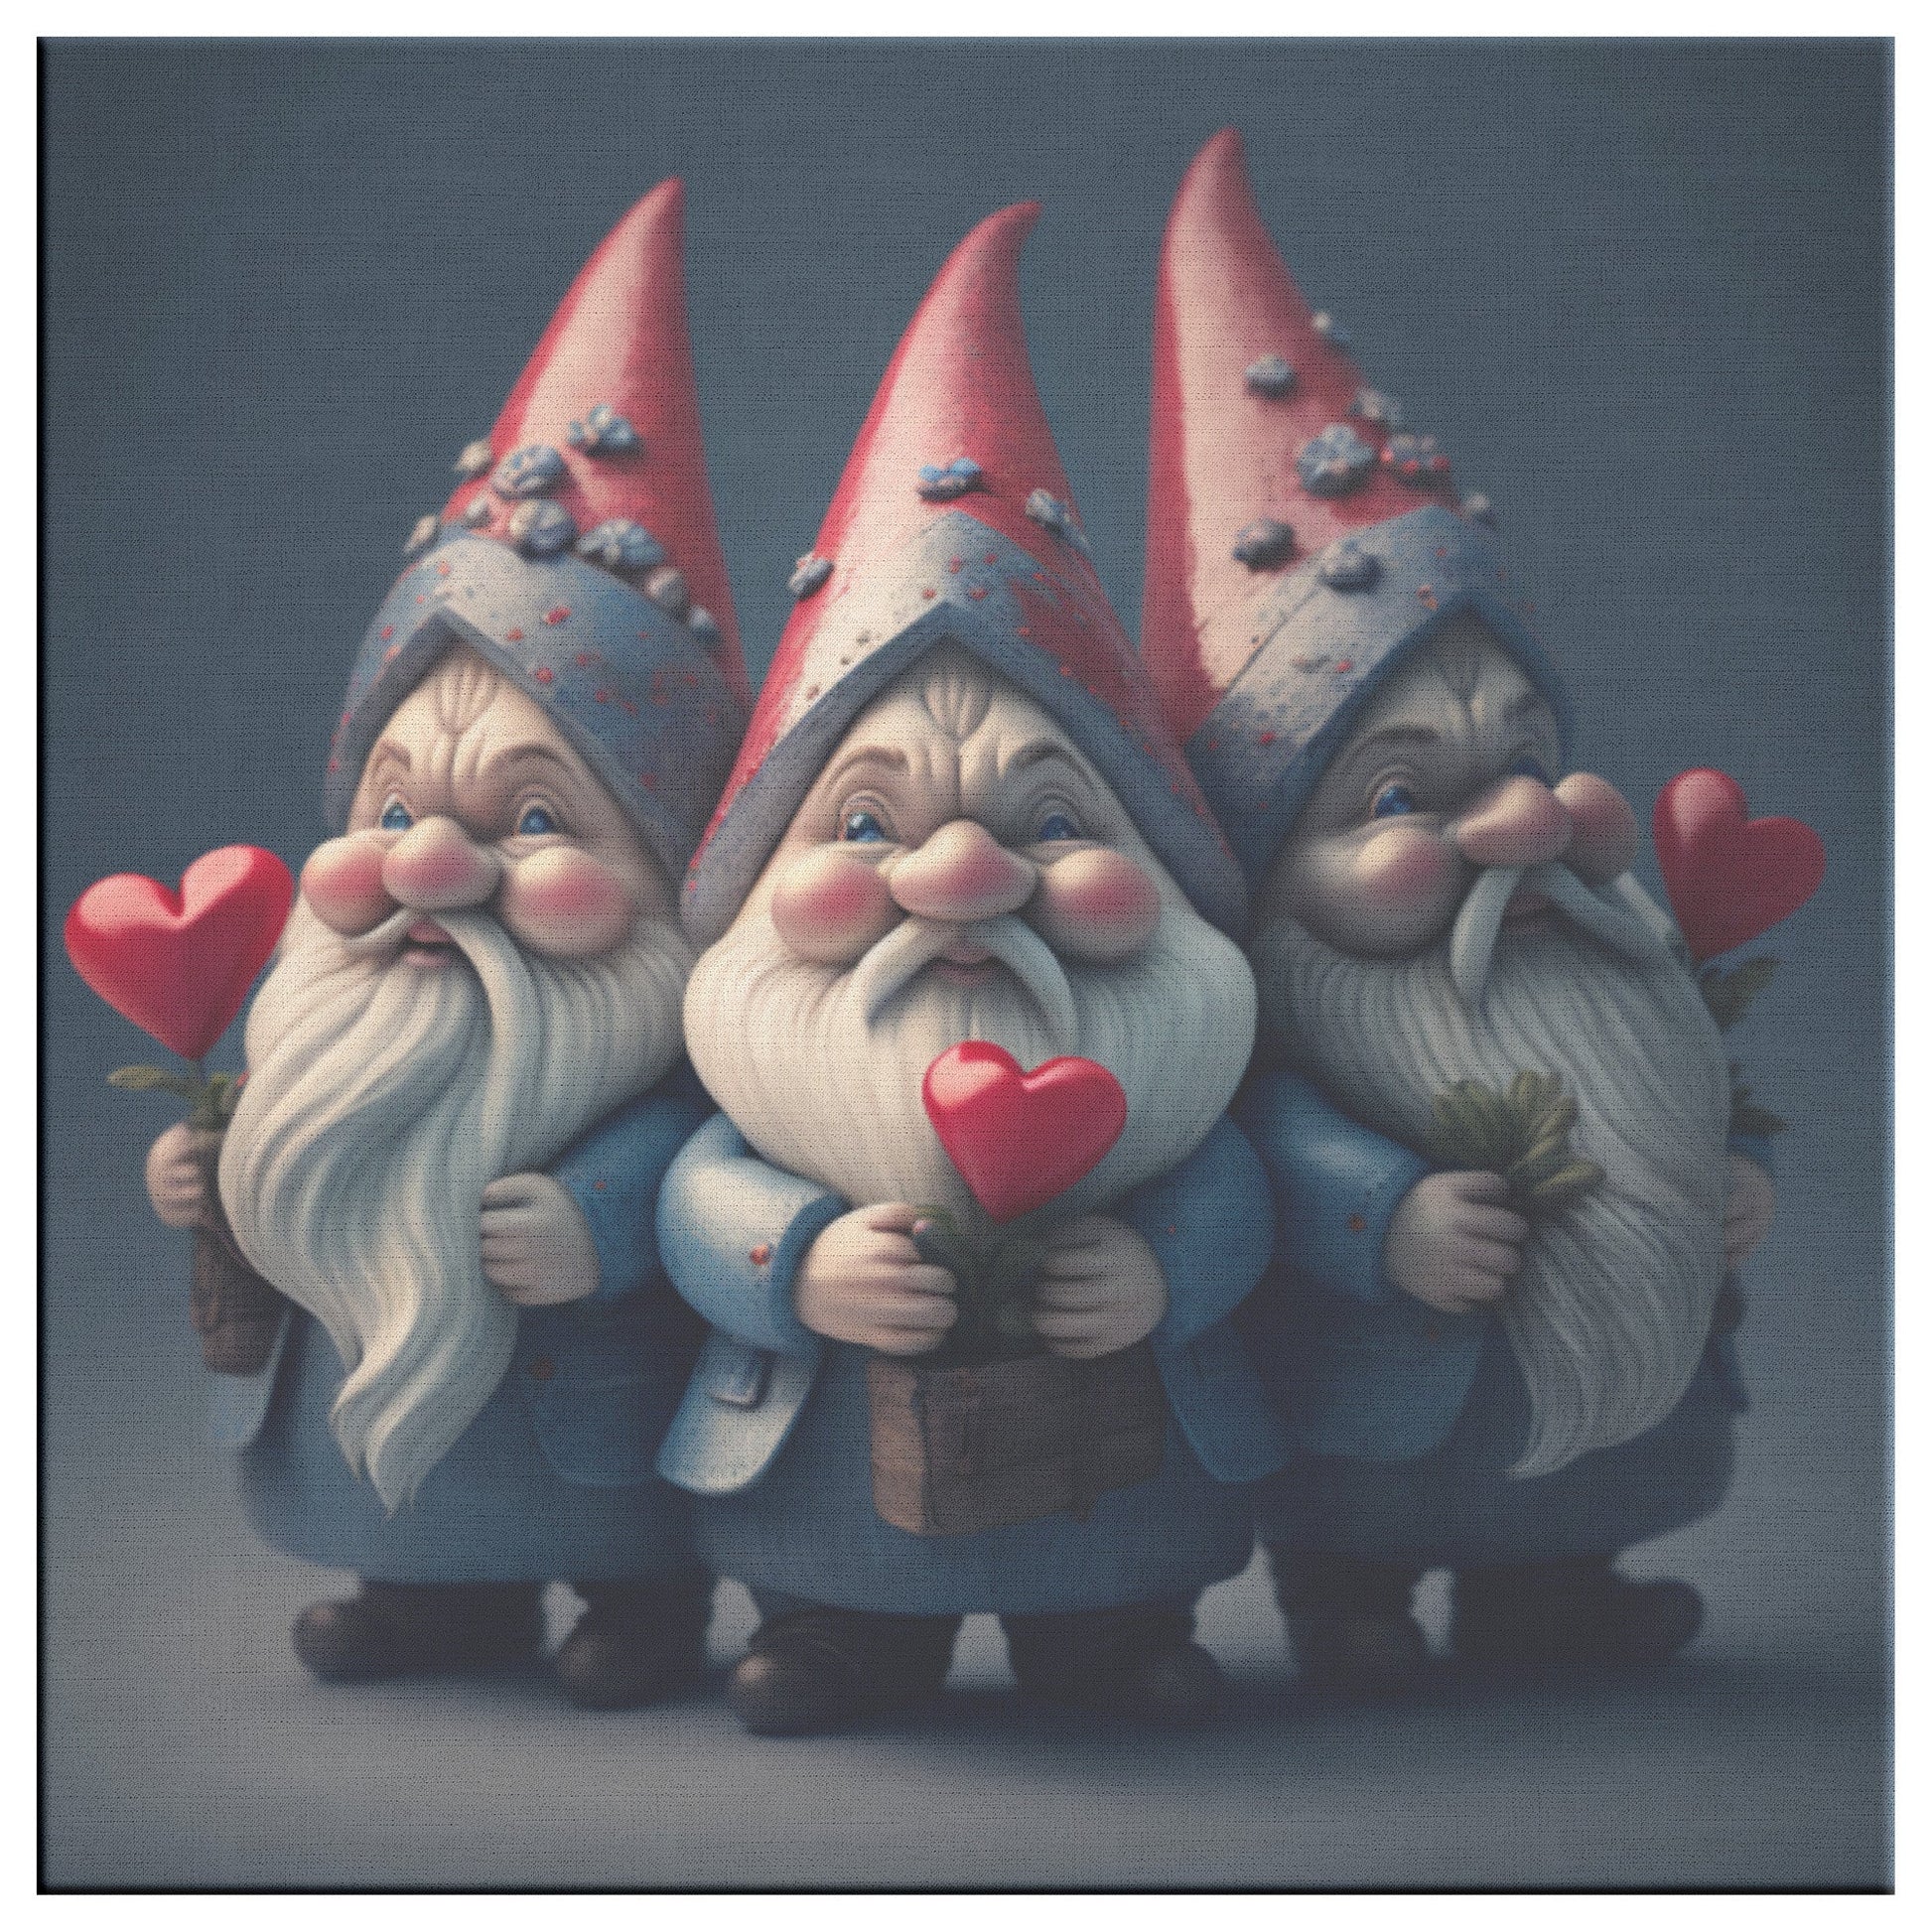 Wall Art - Valentine's Day Wall Art Canvas 3 Gnomes Are Holding Your Heart Super Realistic Image In High Definition